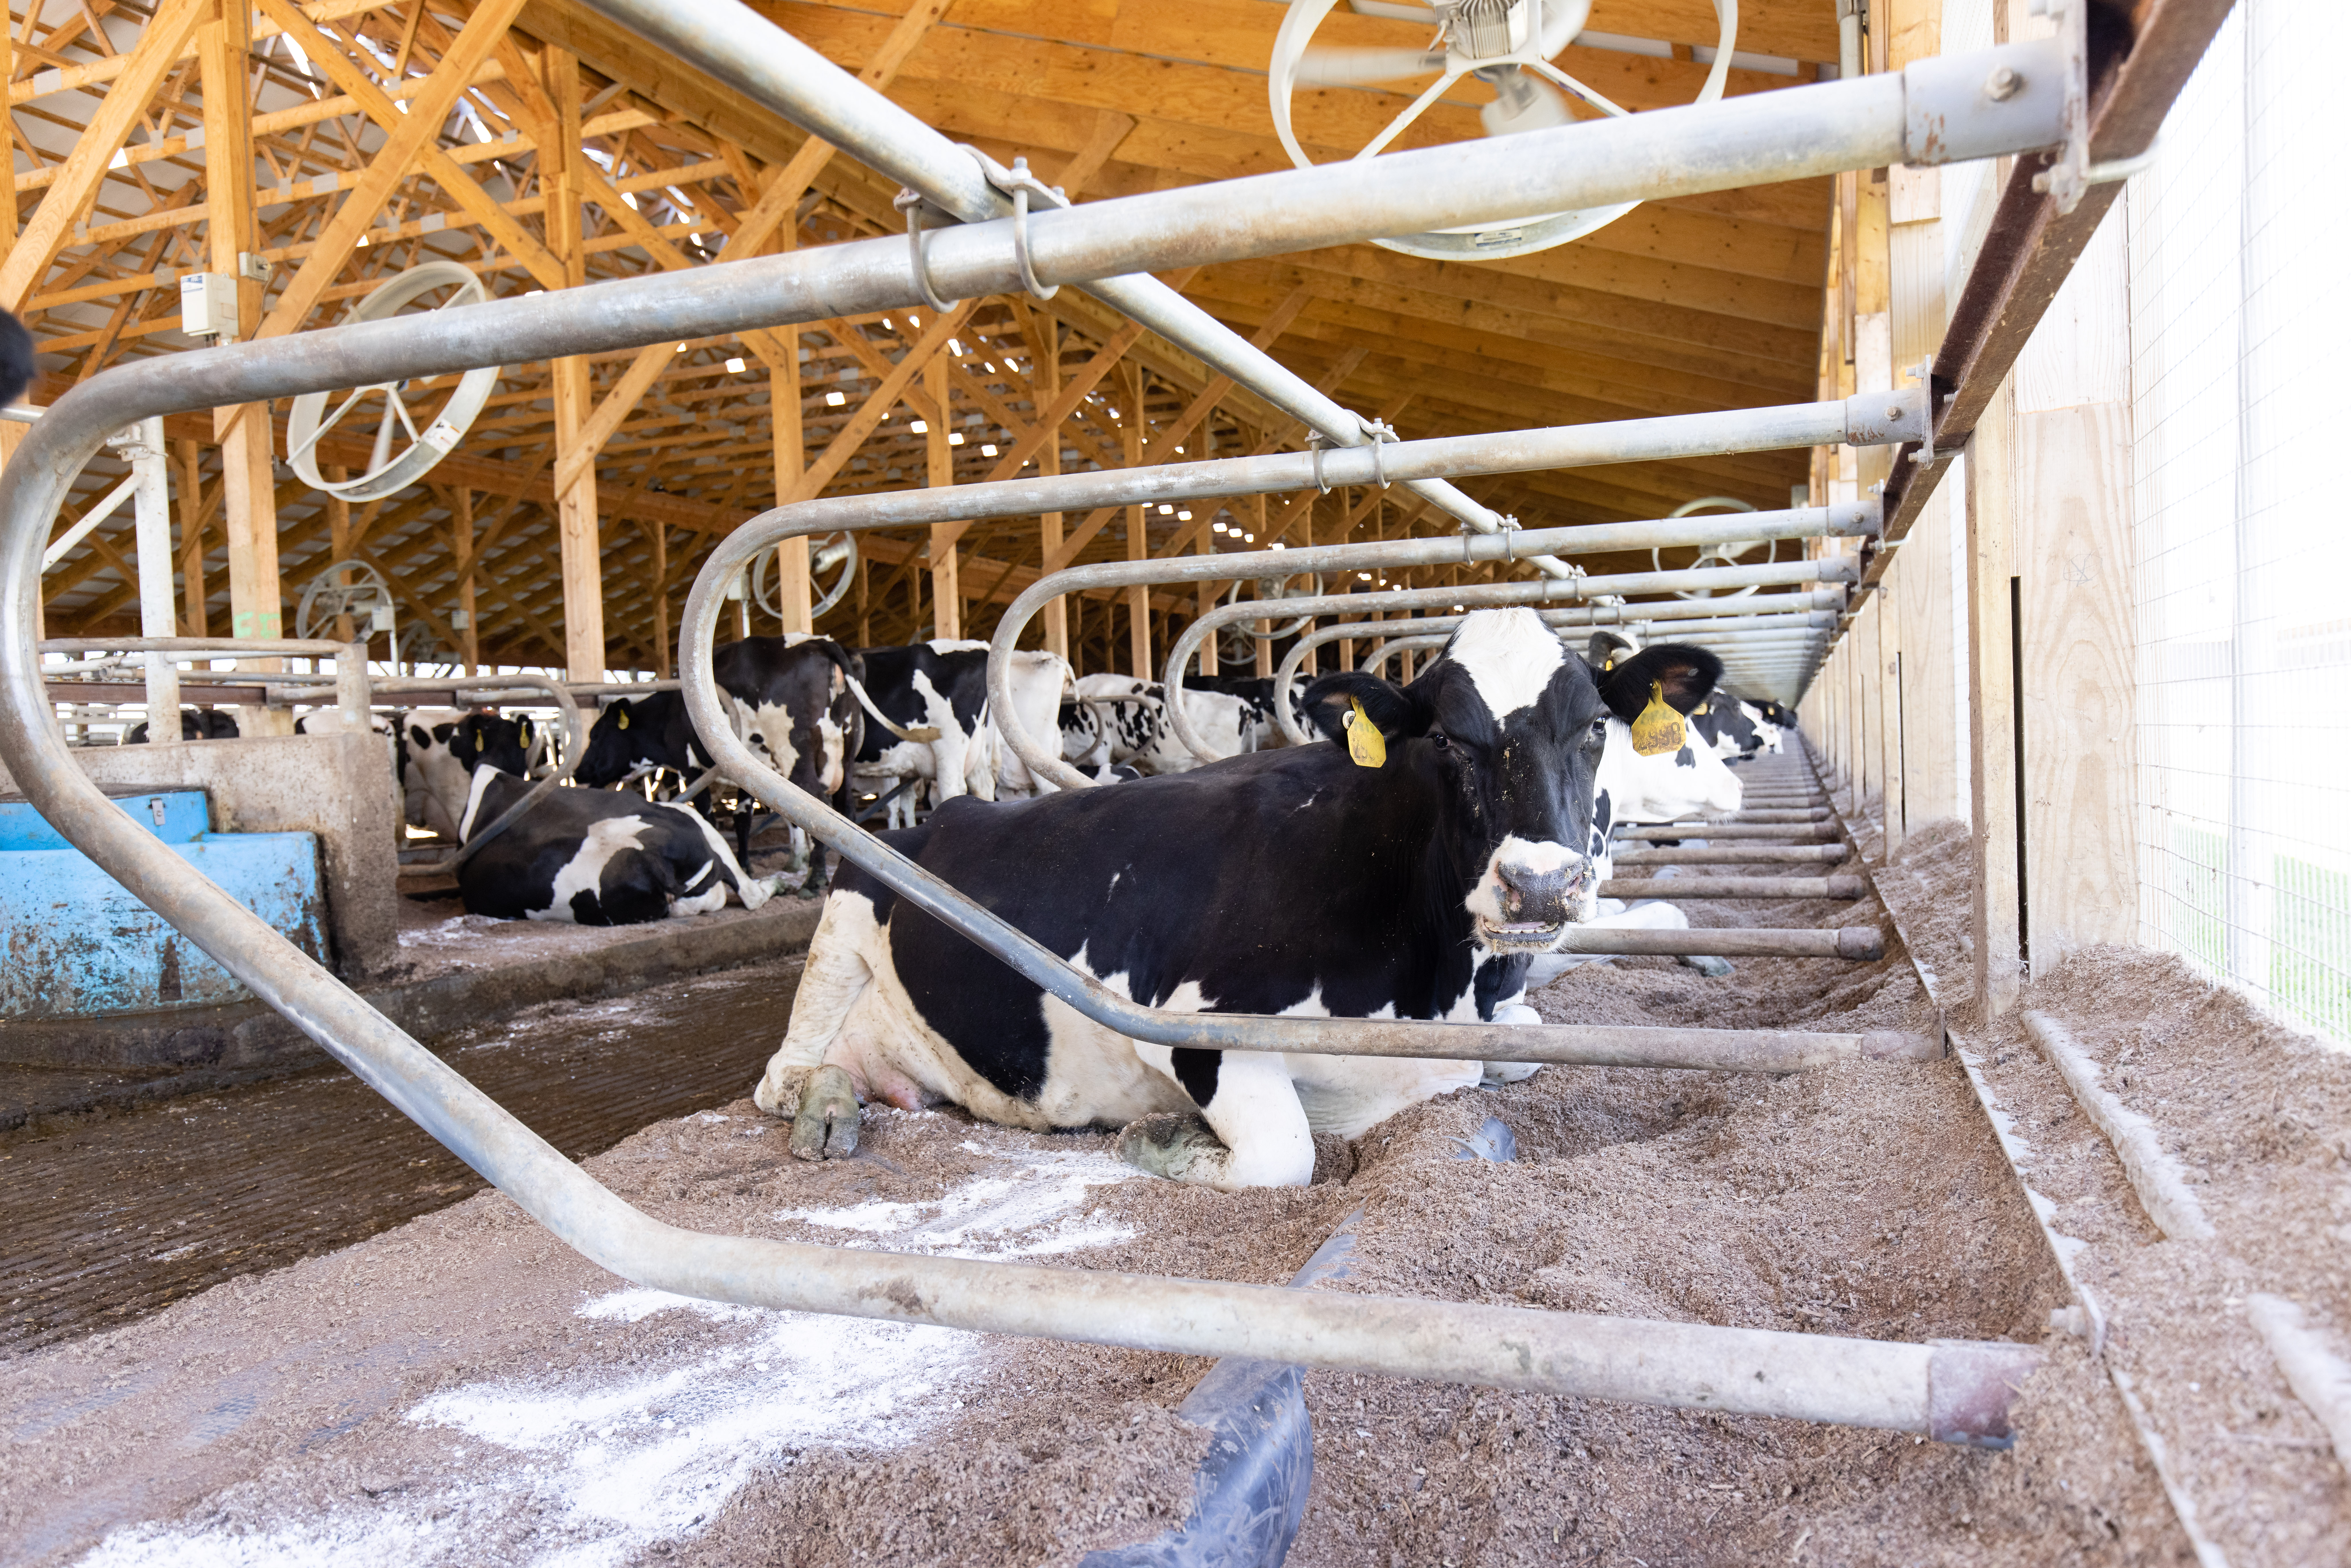 Dairy Farmers Help Cows Stay Cool from Summer Heat